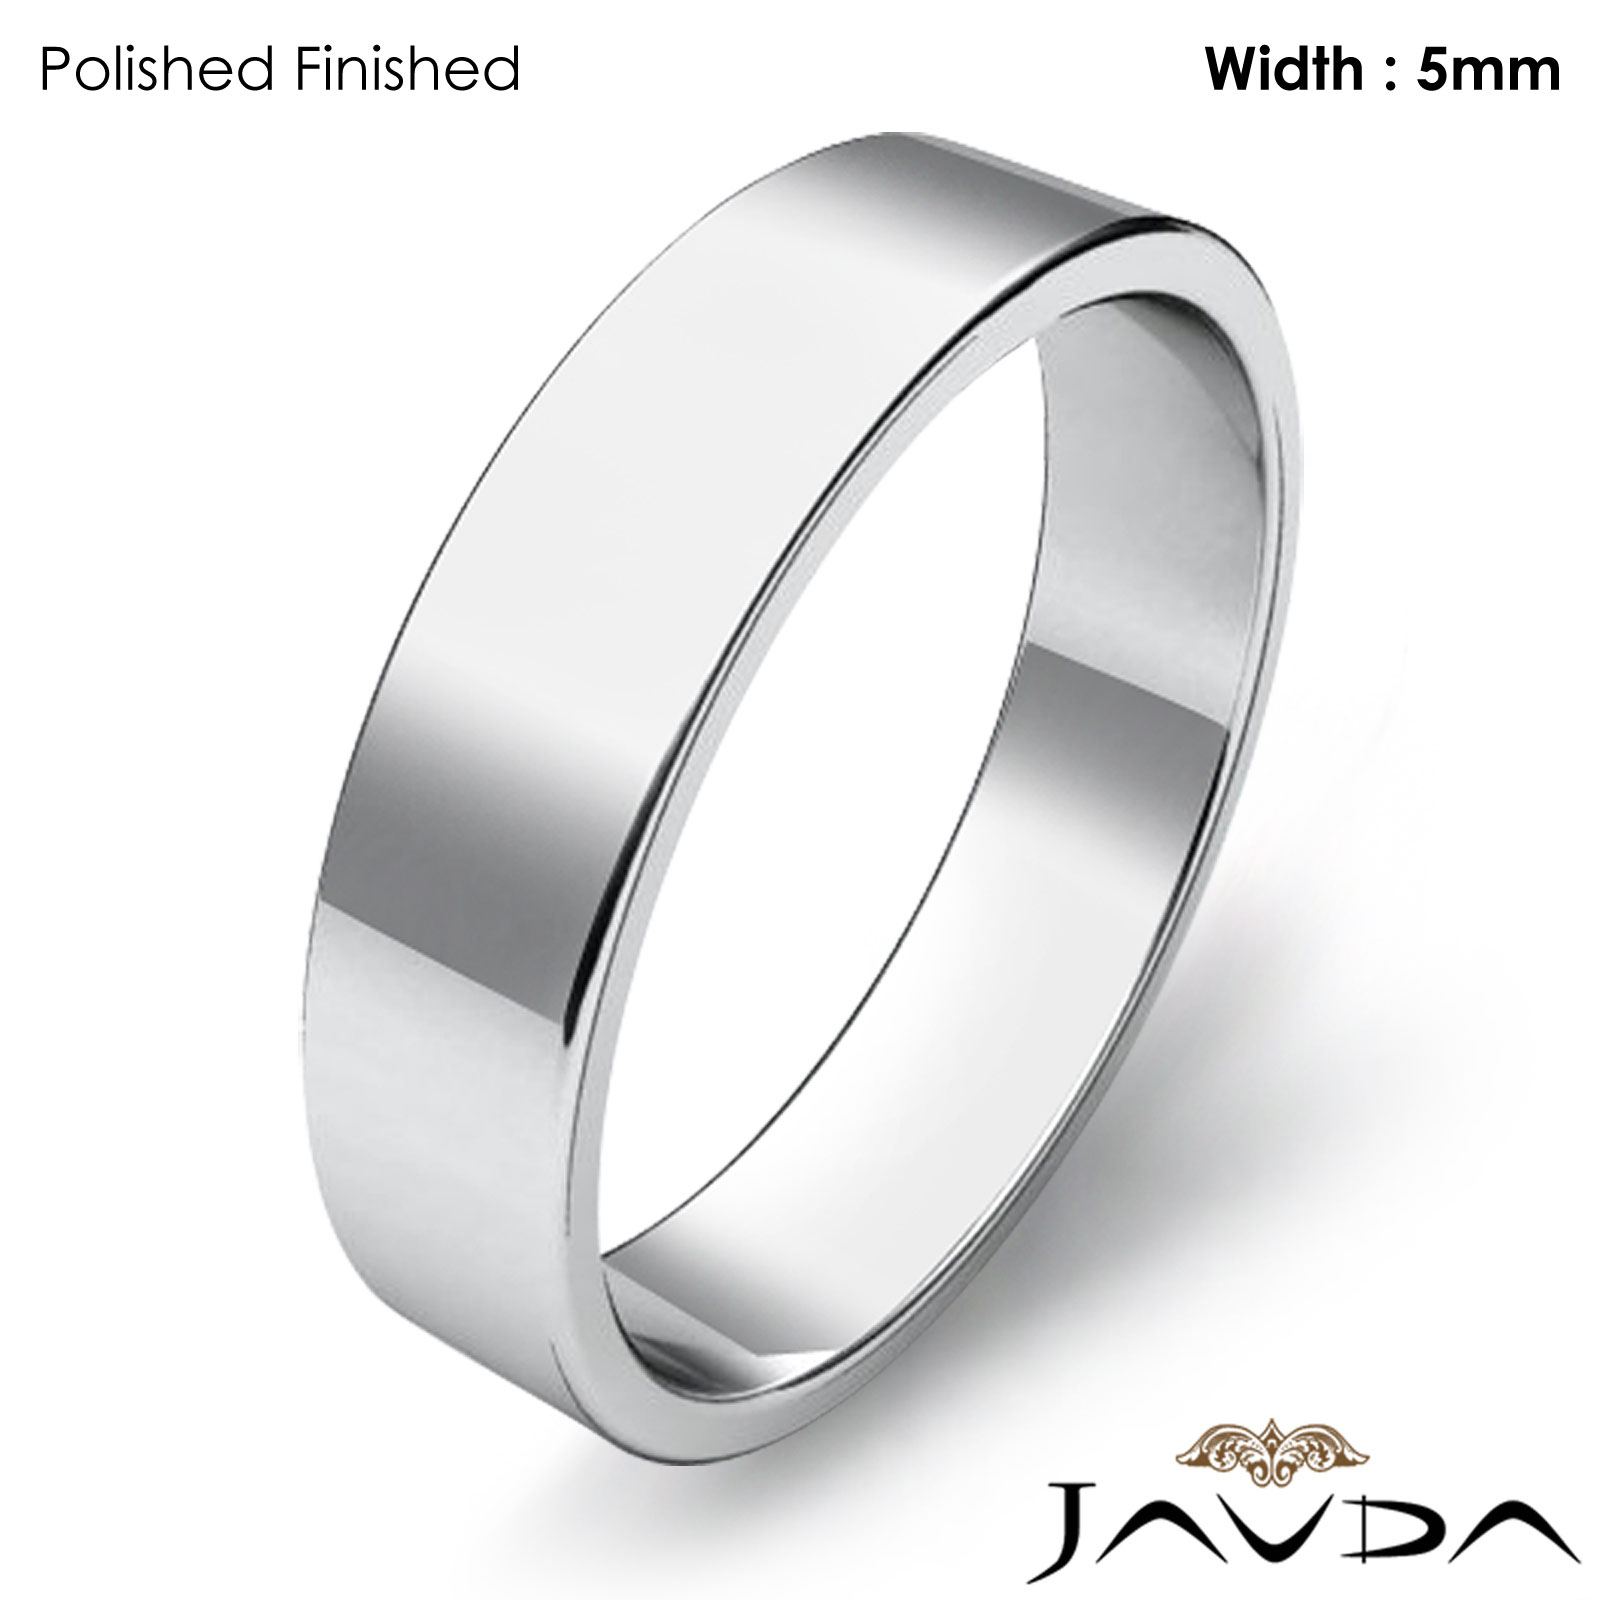 Buy Stainless Steel Rings 316L Stainless Steel Rings Wide Band Ring  Adjustable Silver Cuff Rings 1.5cm Wide Cuff Ring Black Ring Online in  India - Etsy